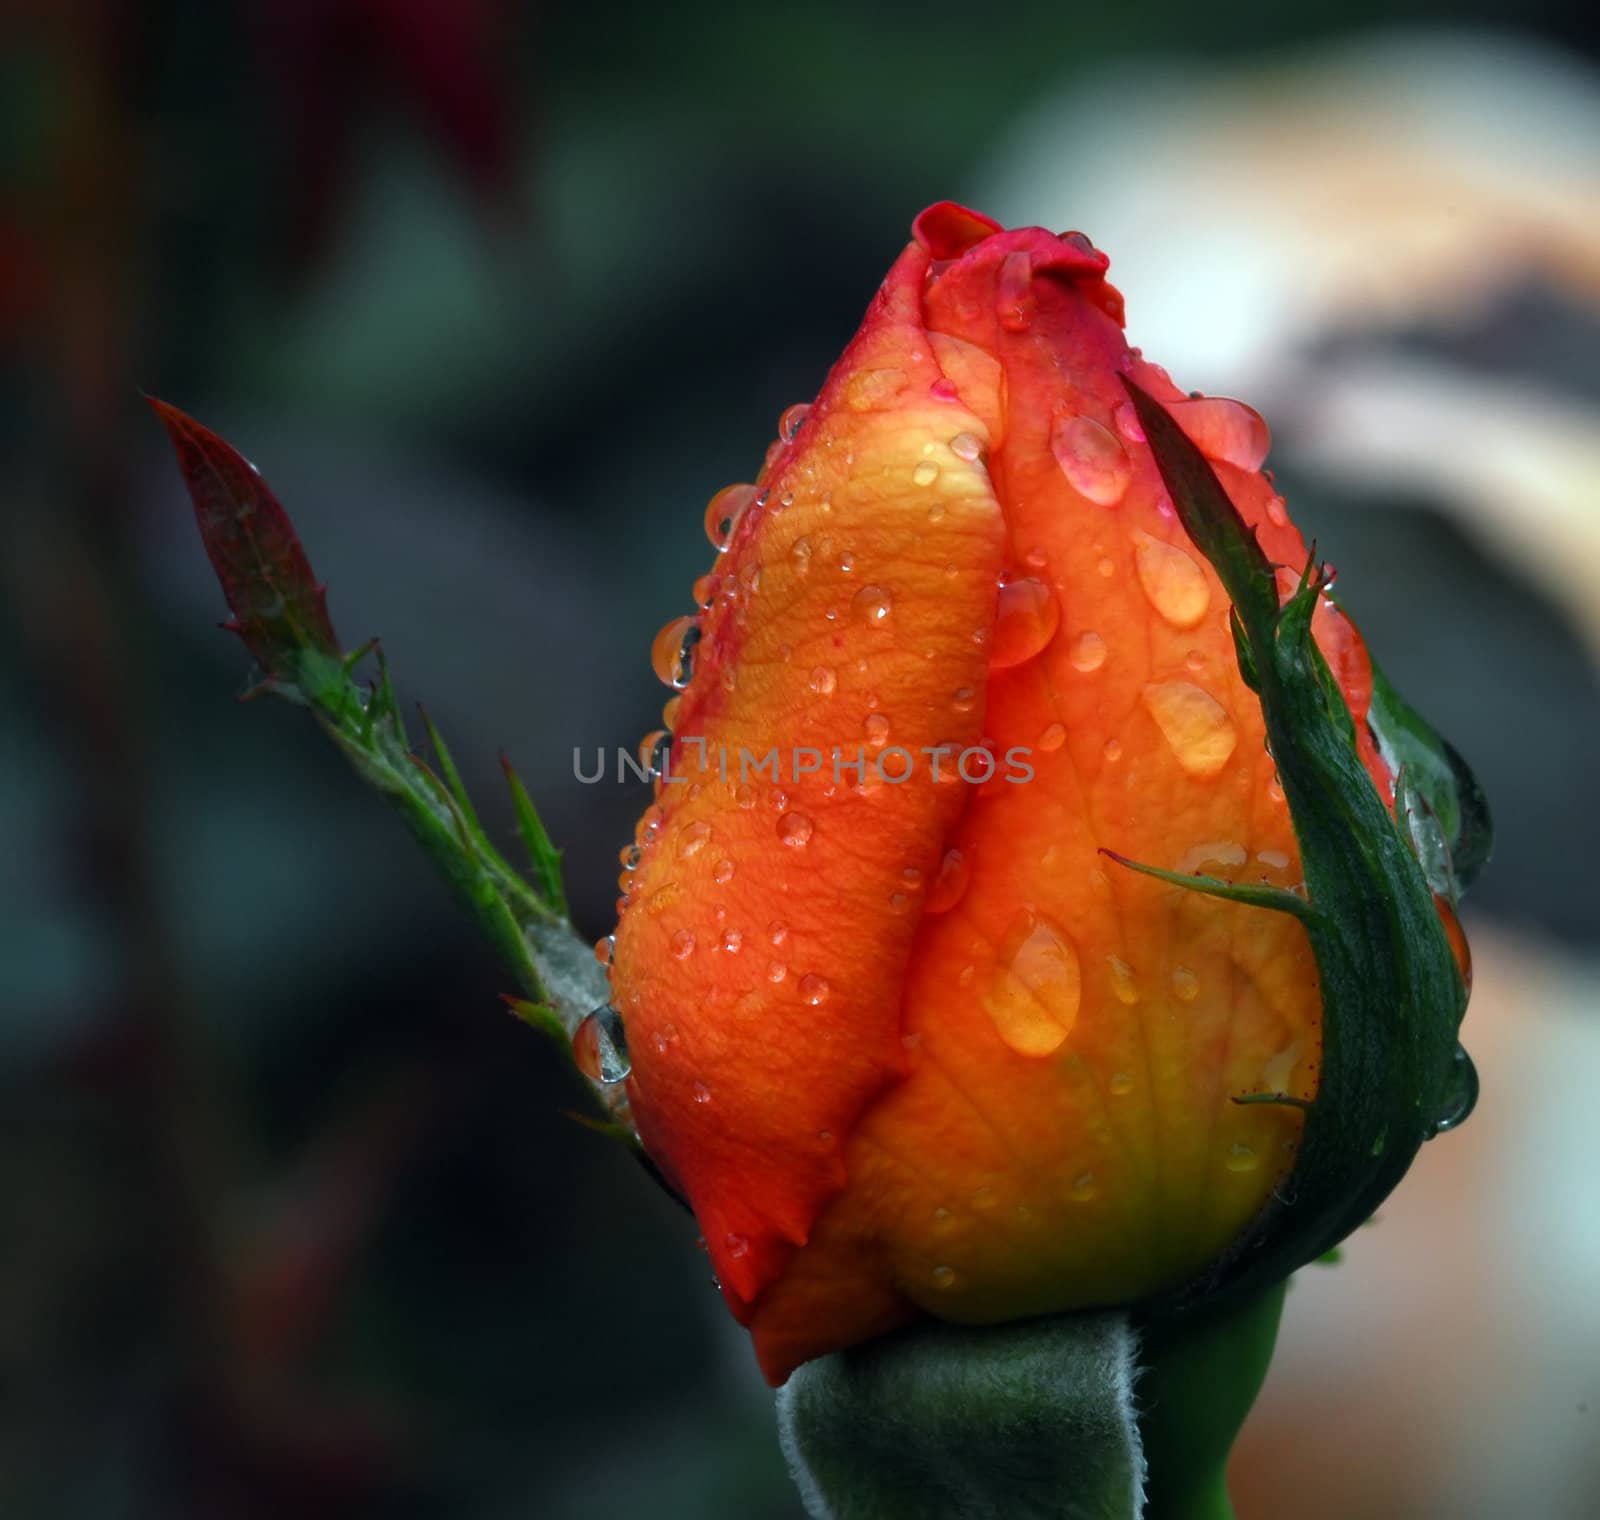 Orange rose's bud with droplets by nialat